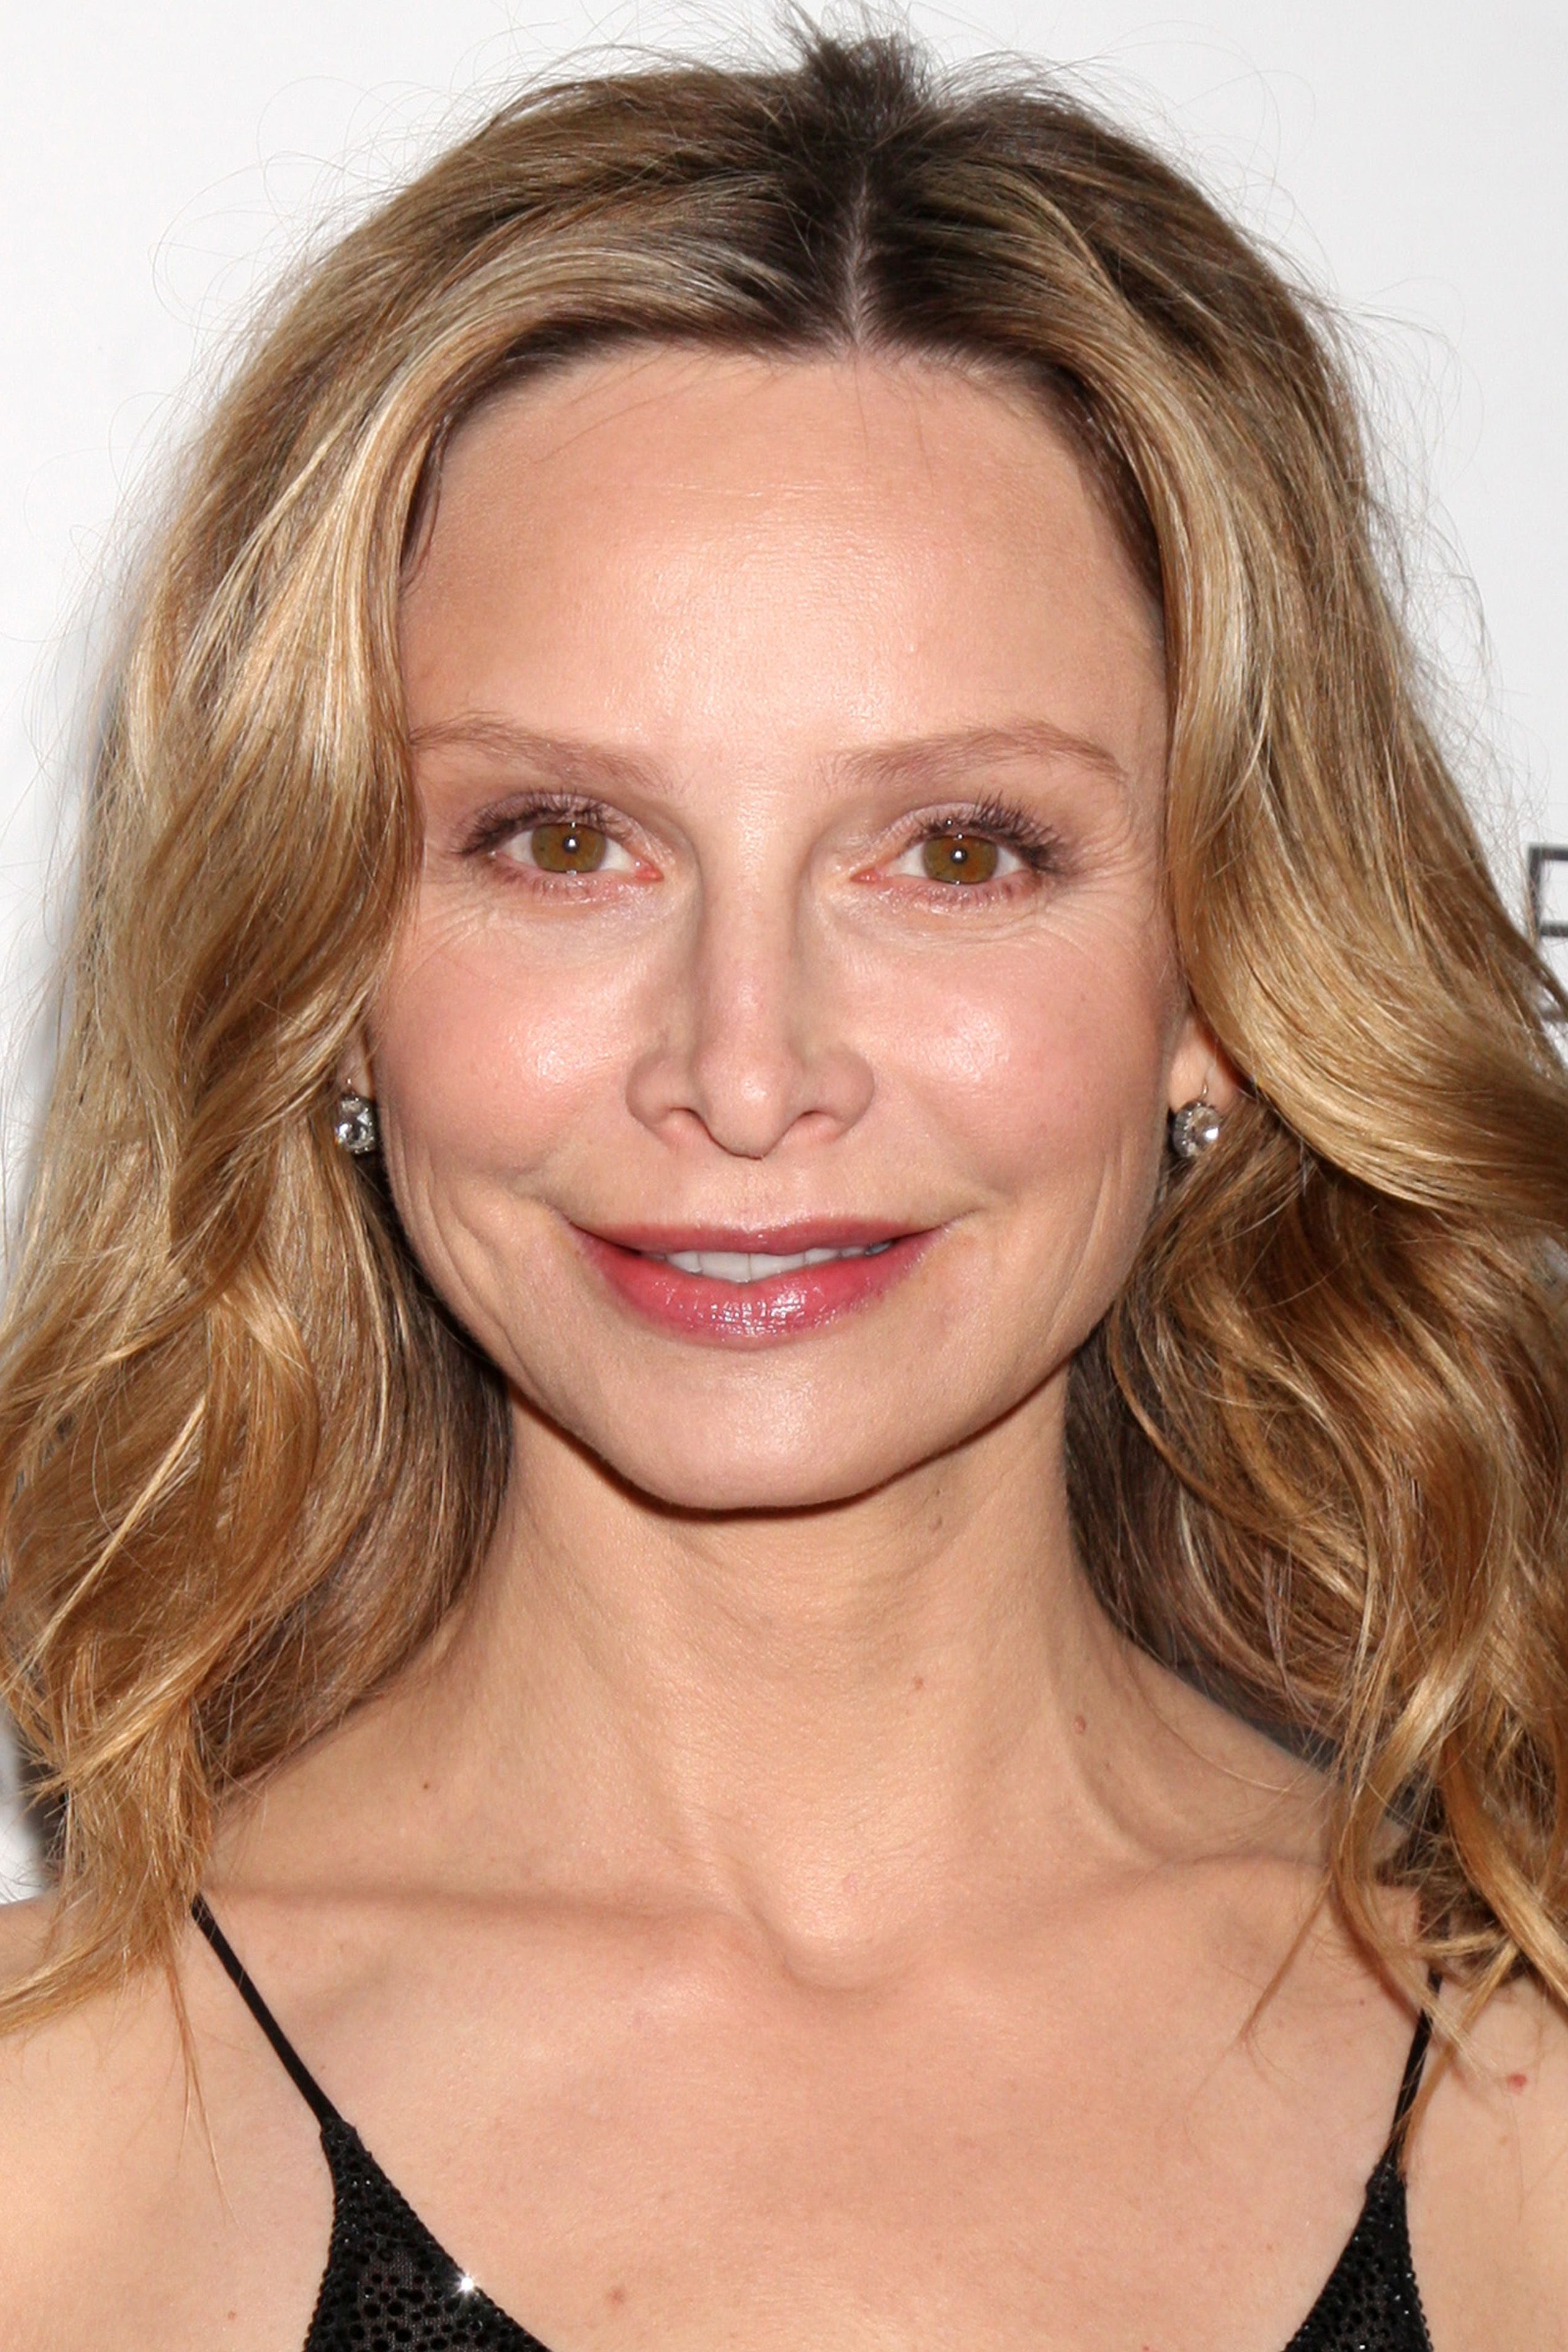 Calista Flockhart wears a black dress with diamond earrings and smiles.